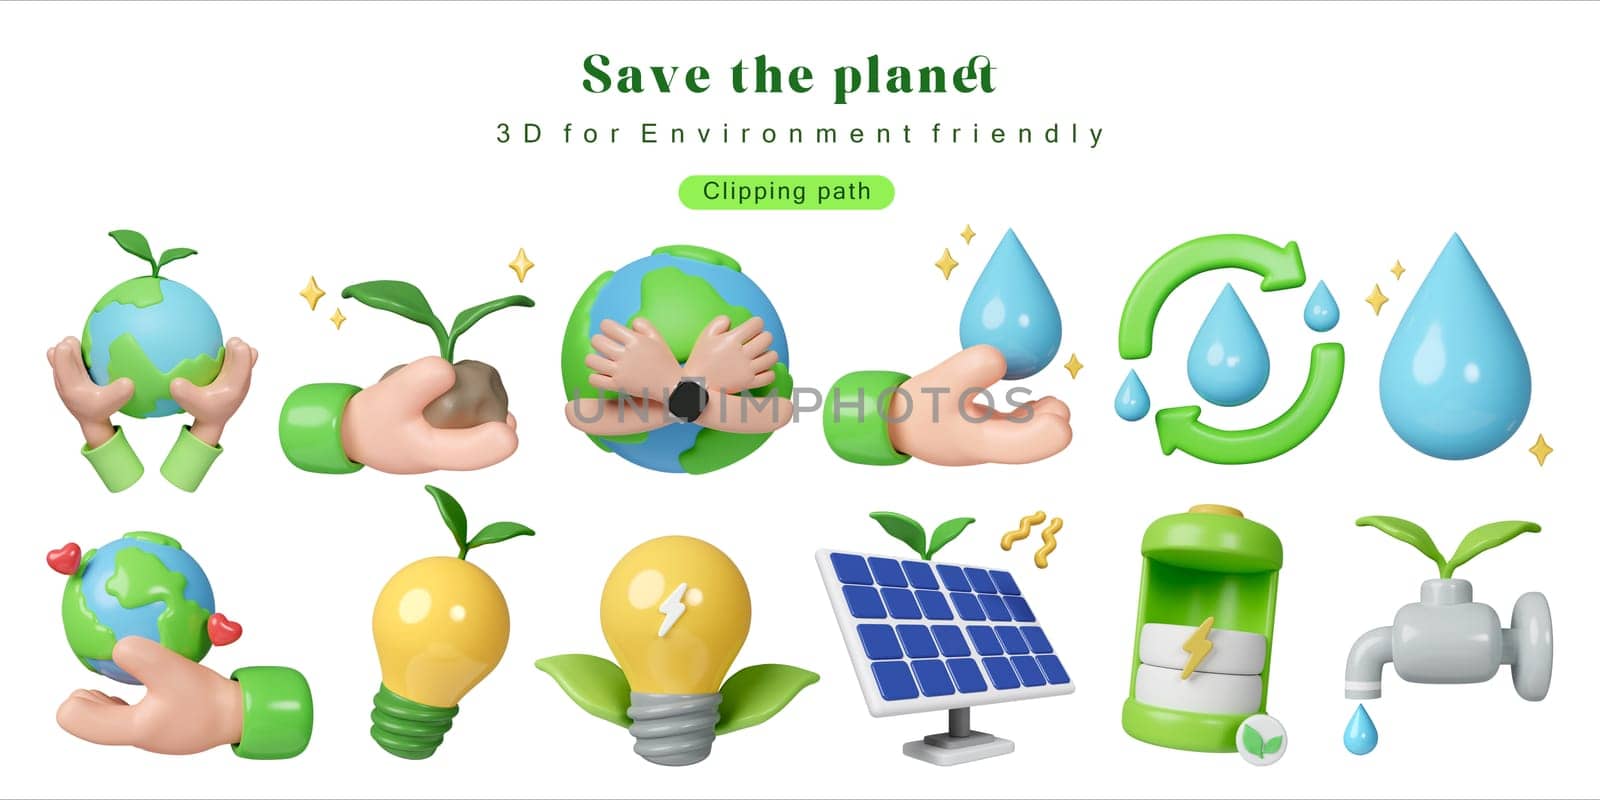 Eco Global Warming icon set Illustration Eco global warming icons for Environment friendly or recycling concept illustration for Sticker, poster, web, mobile, social media post. 3D Illustration by meepiangraphic